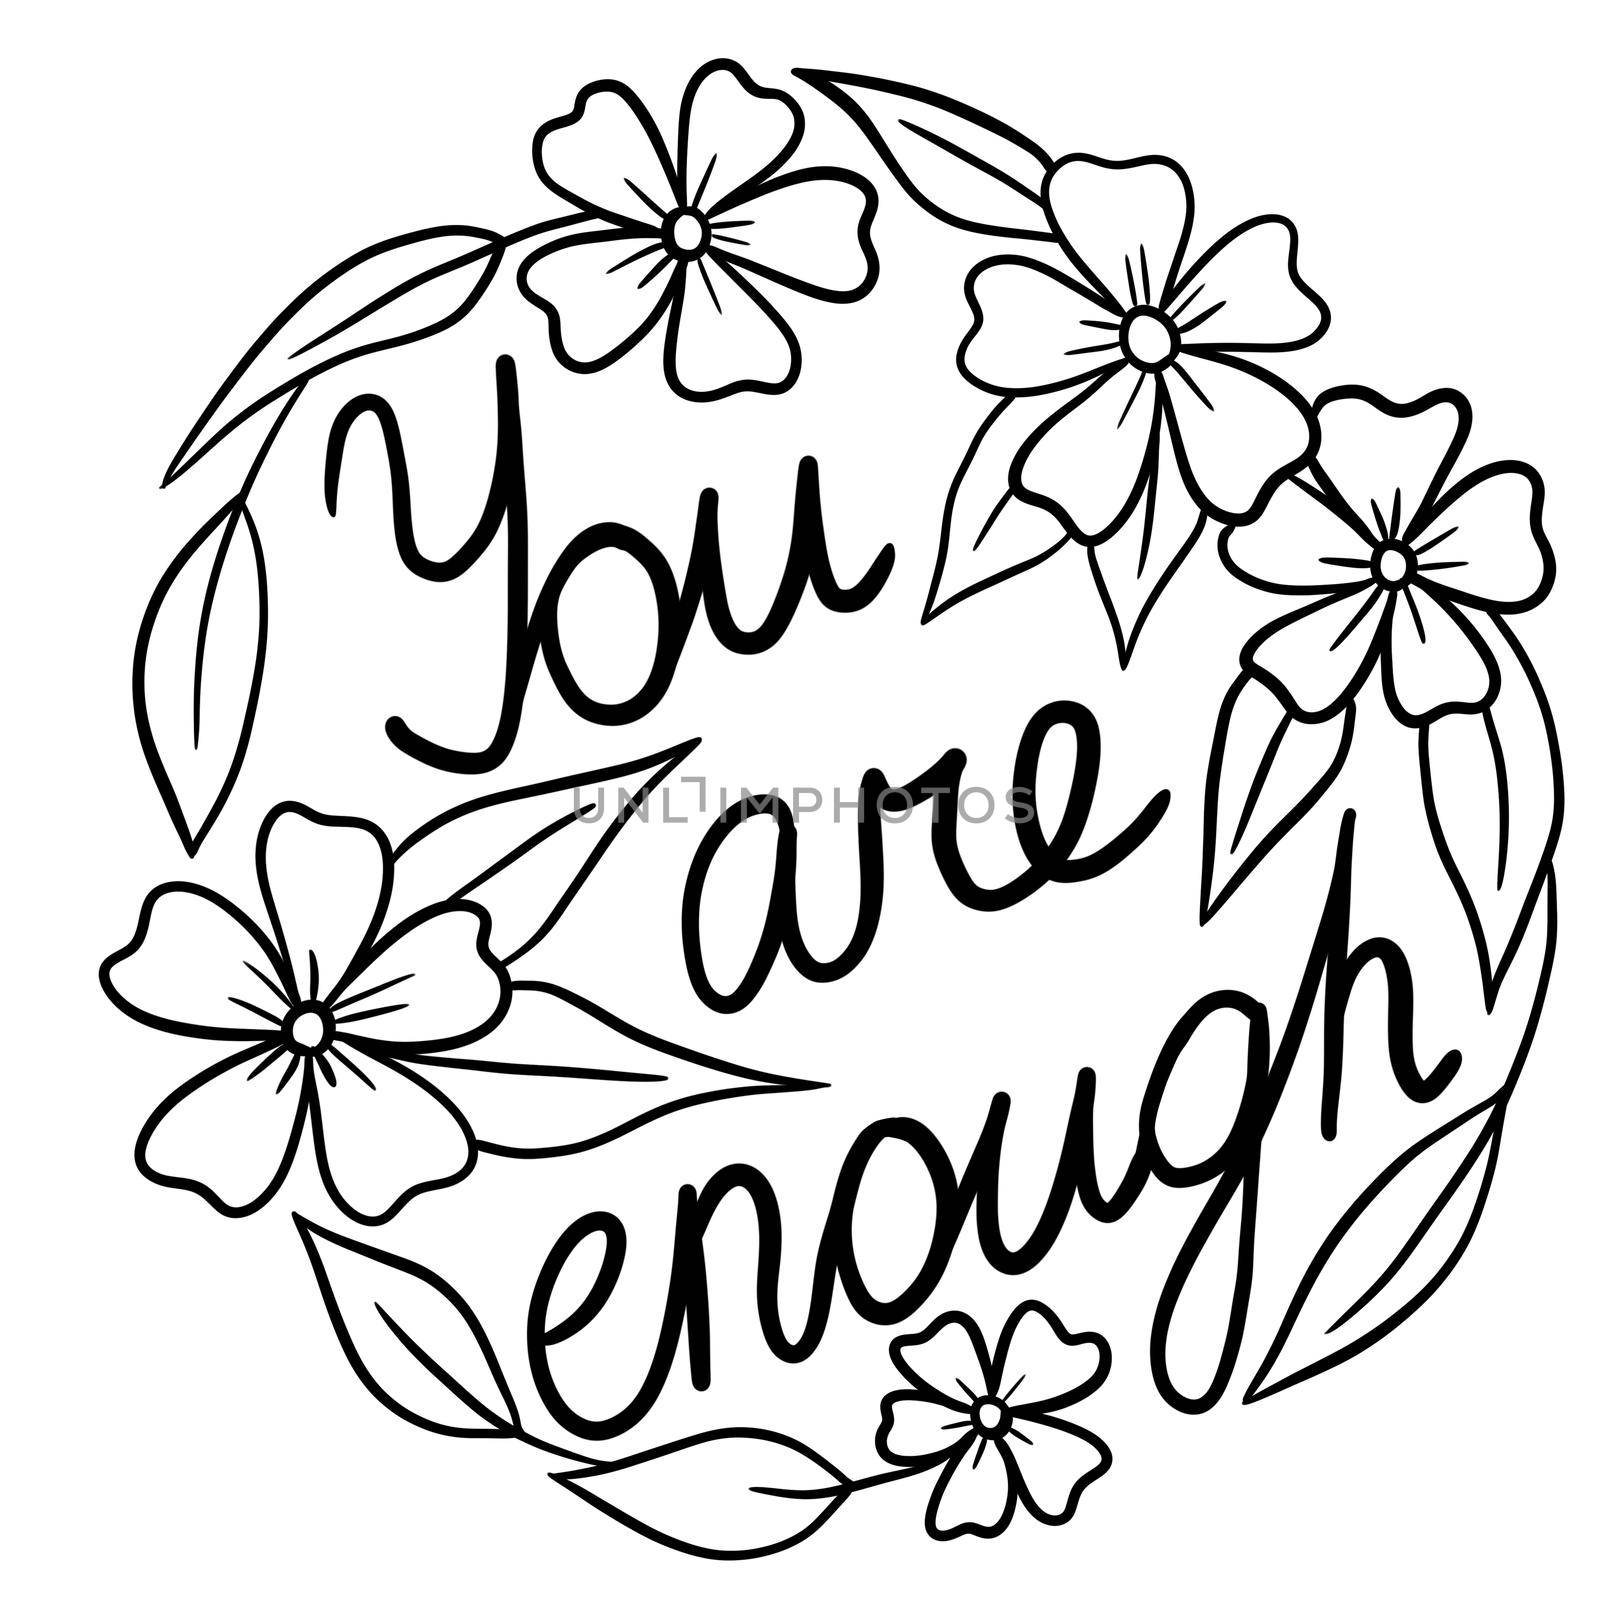 Round circle illustration with flowers You Are Enough word. Floral black line outline design for poster cards with leaf leaves blooming daisy, motivation affirmation